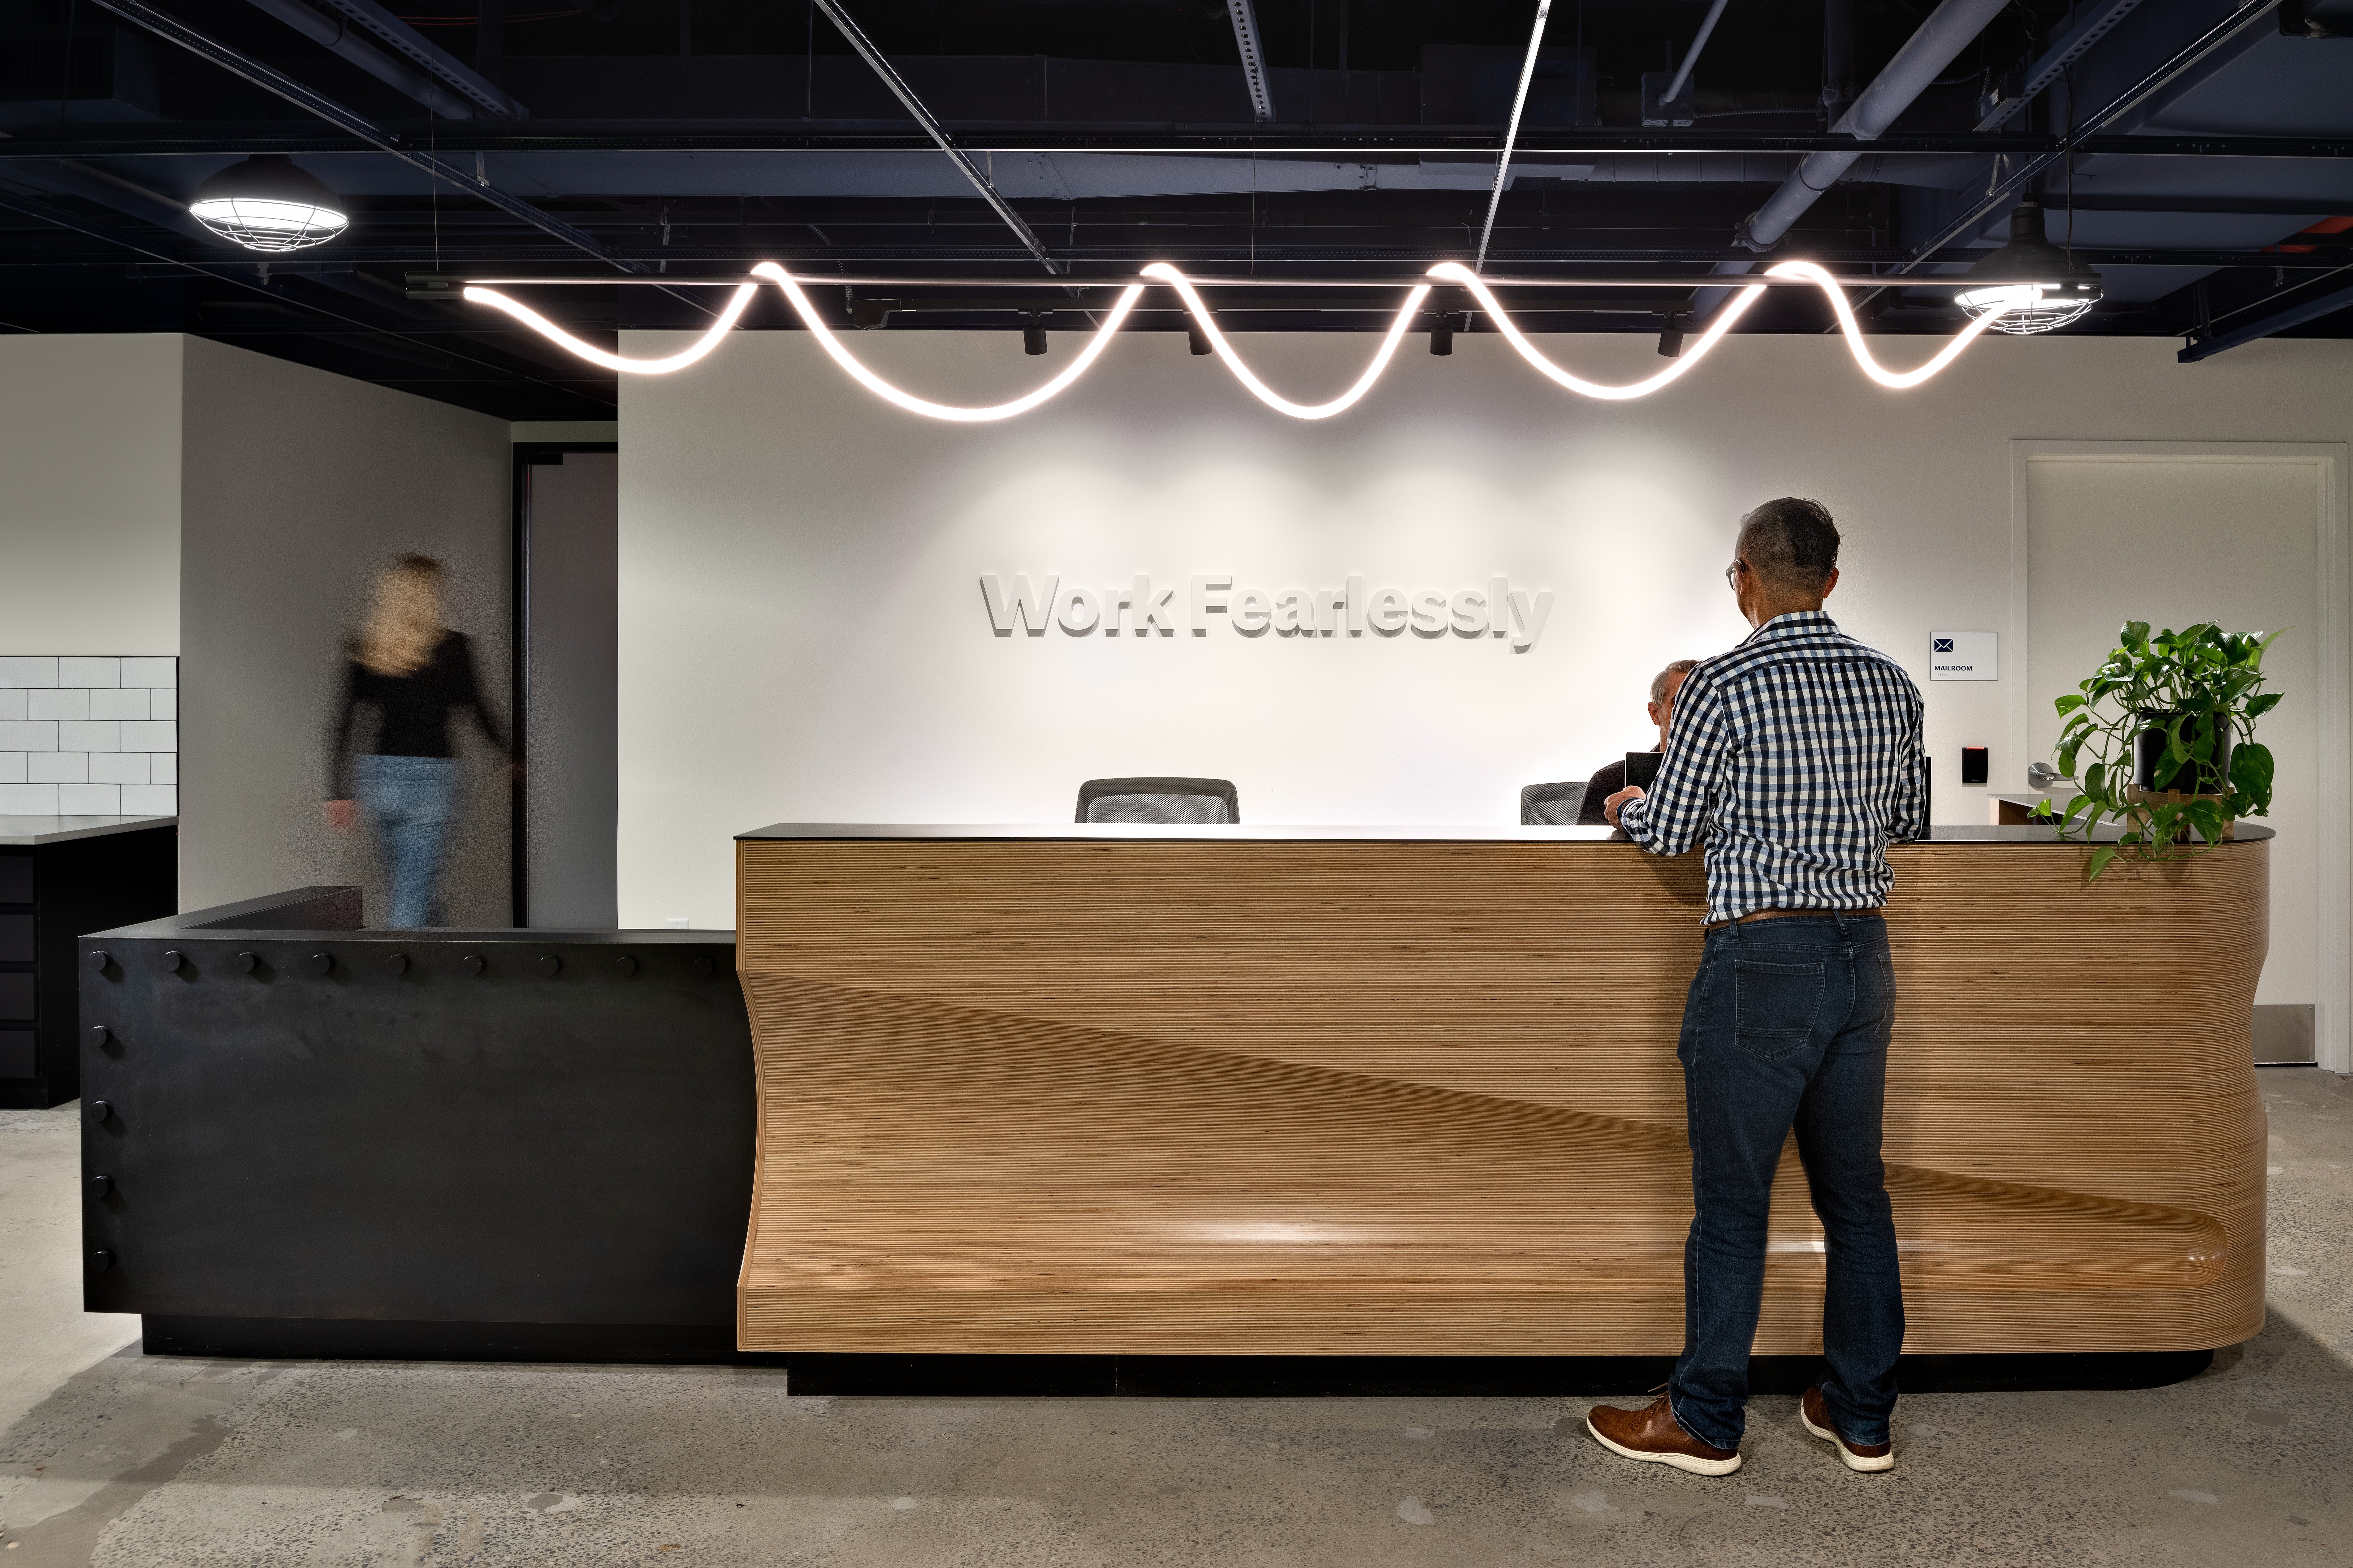 Photo of Justworks’ reception desk with “Work Fearlessly” on wall and zigzag lighting above.